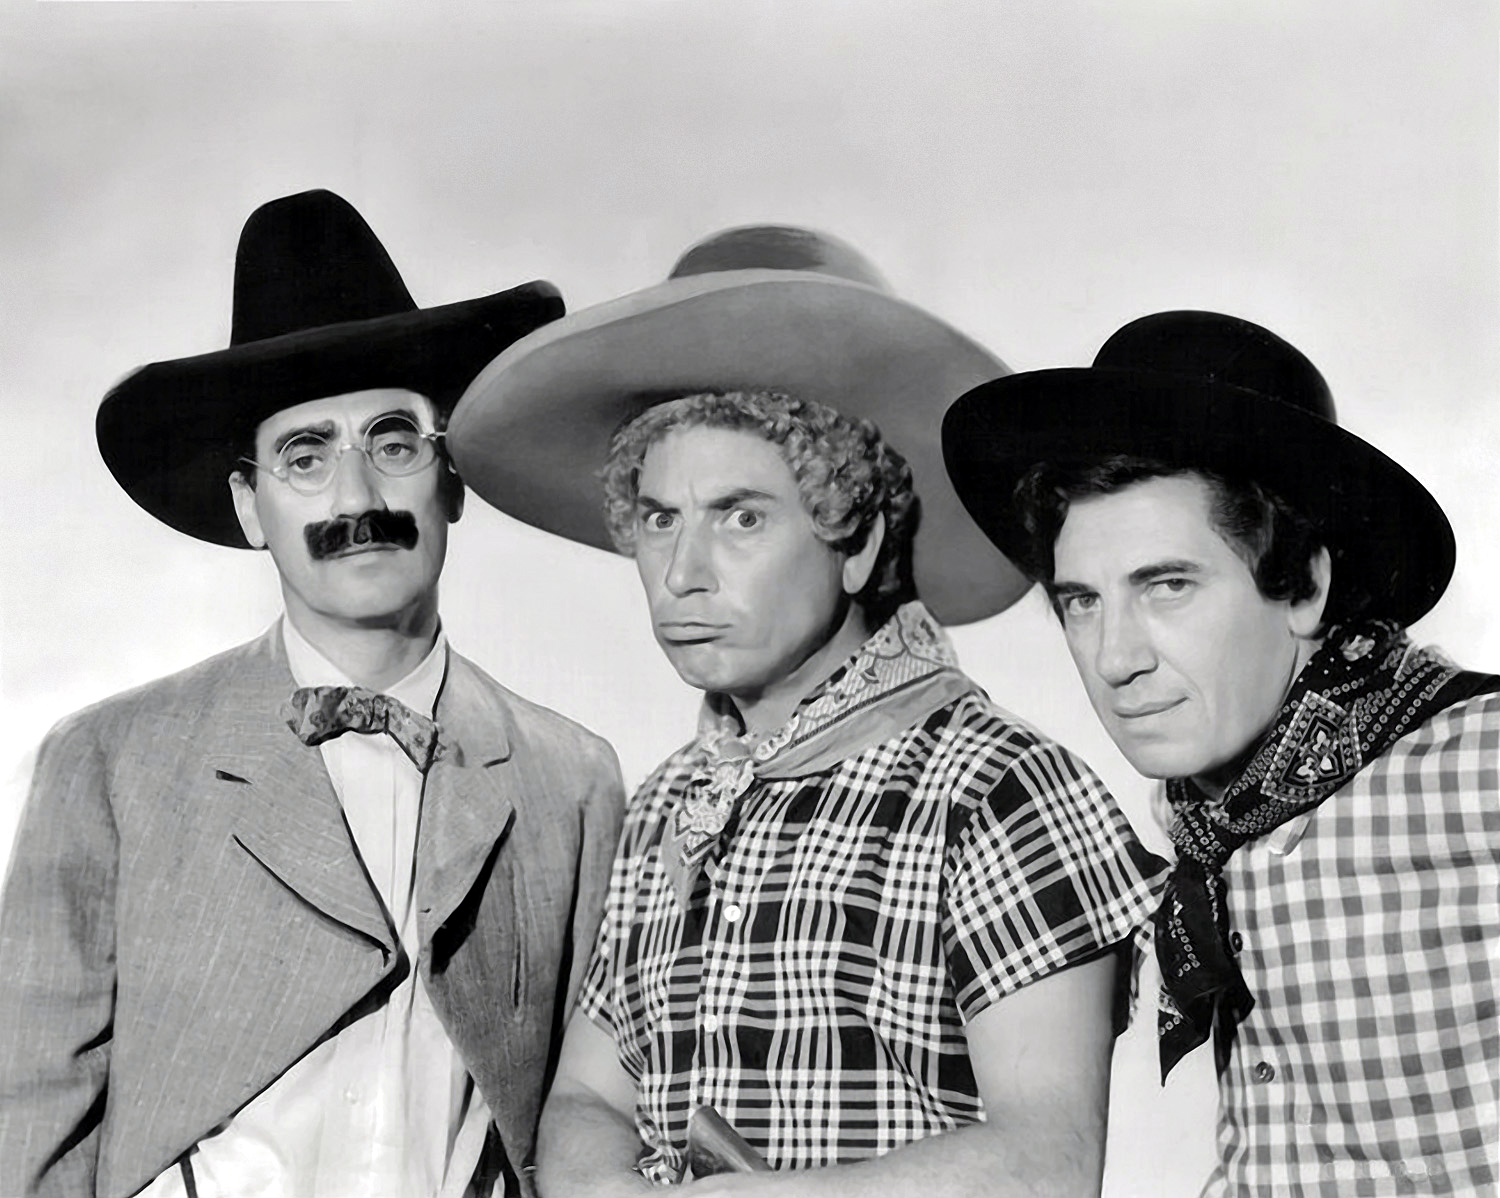 The Unknown Marx Brothers